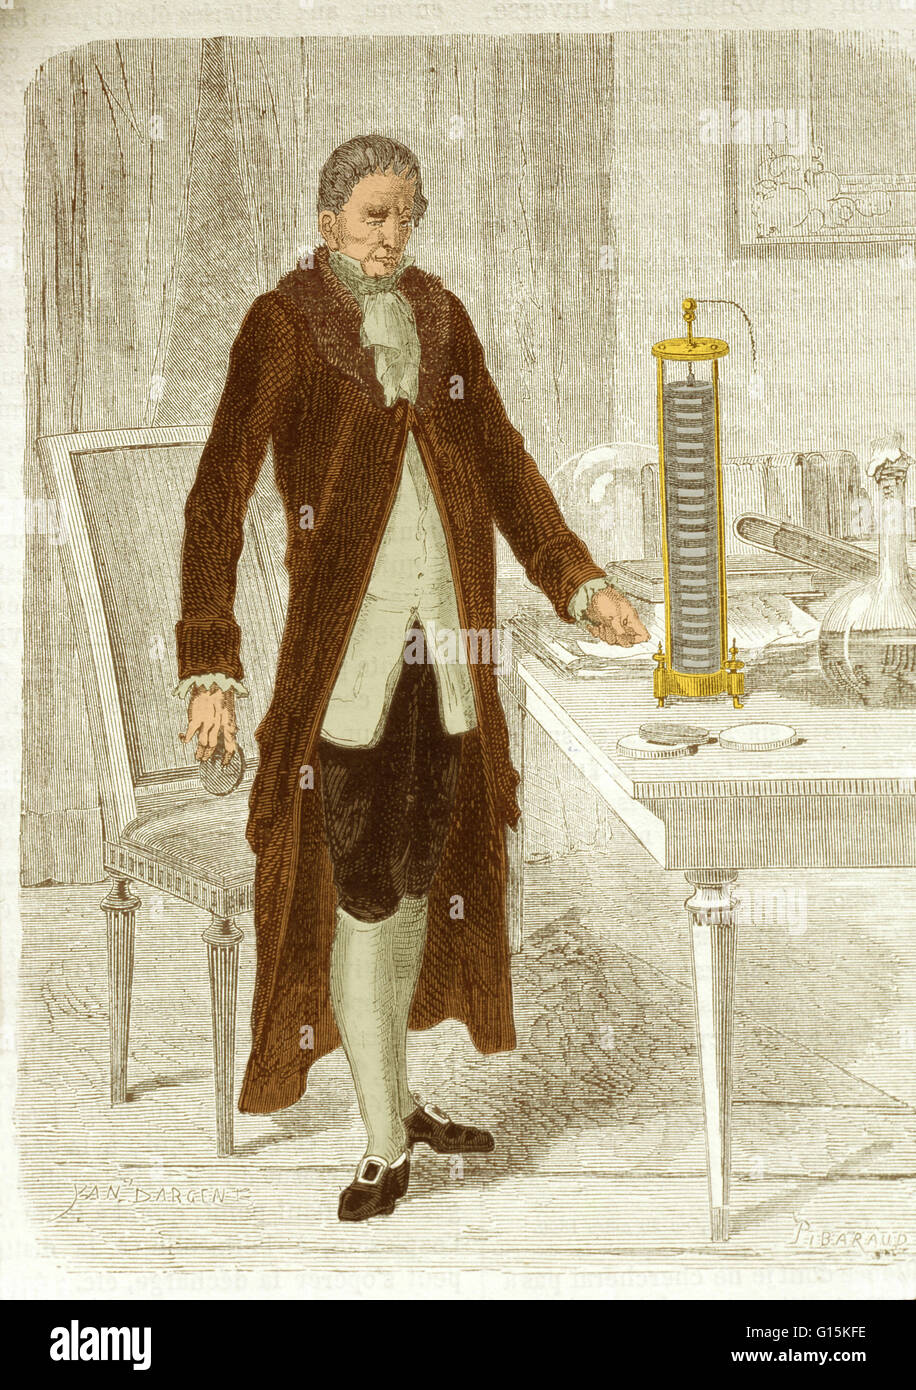 Volta posing with his newly-invented battery or "Voltaic pile". Alessandro  Volta (1745-1827) was an Italian physicist. He became interested in  electricity in 1786 after seeing the work of Galvani. Volta was the